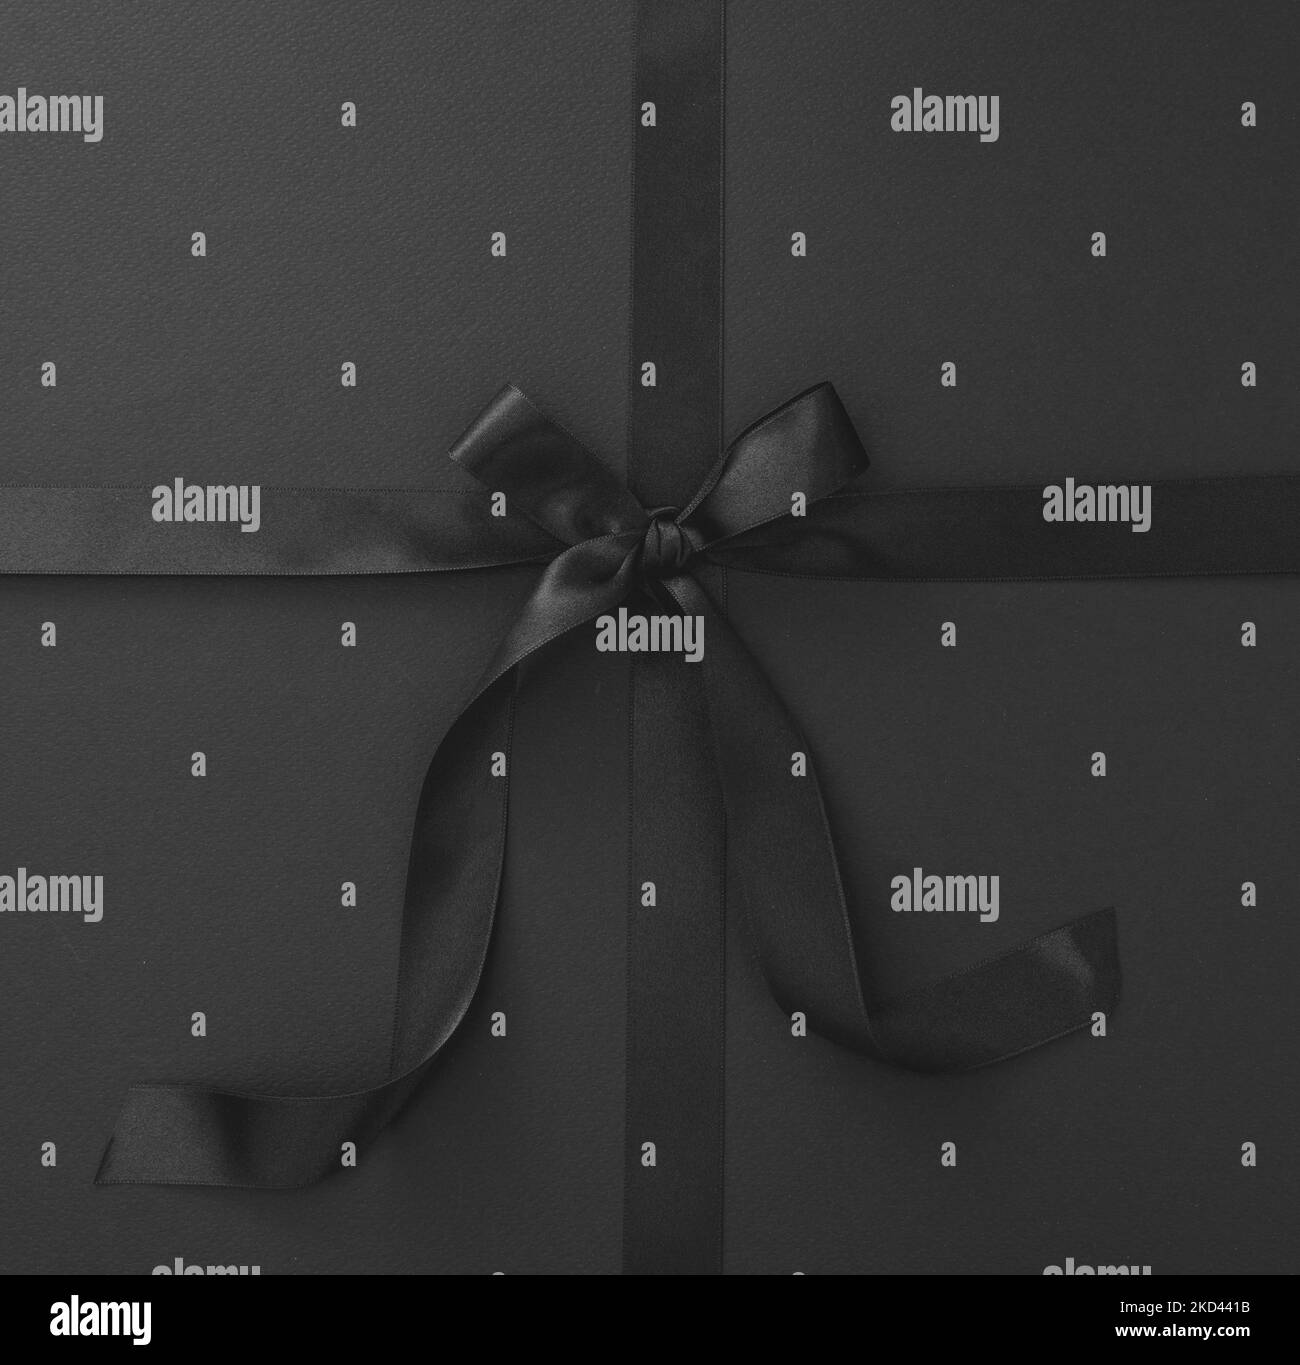 Black Friday sales promotion concept. Luxury black satin ribbon and tied bow on black background, top view. Advertising template Stock Photo